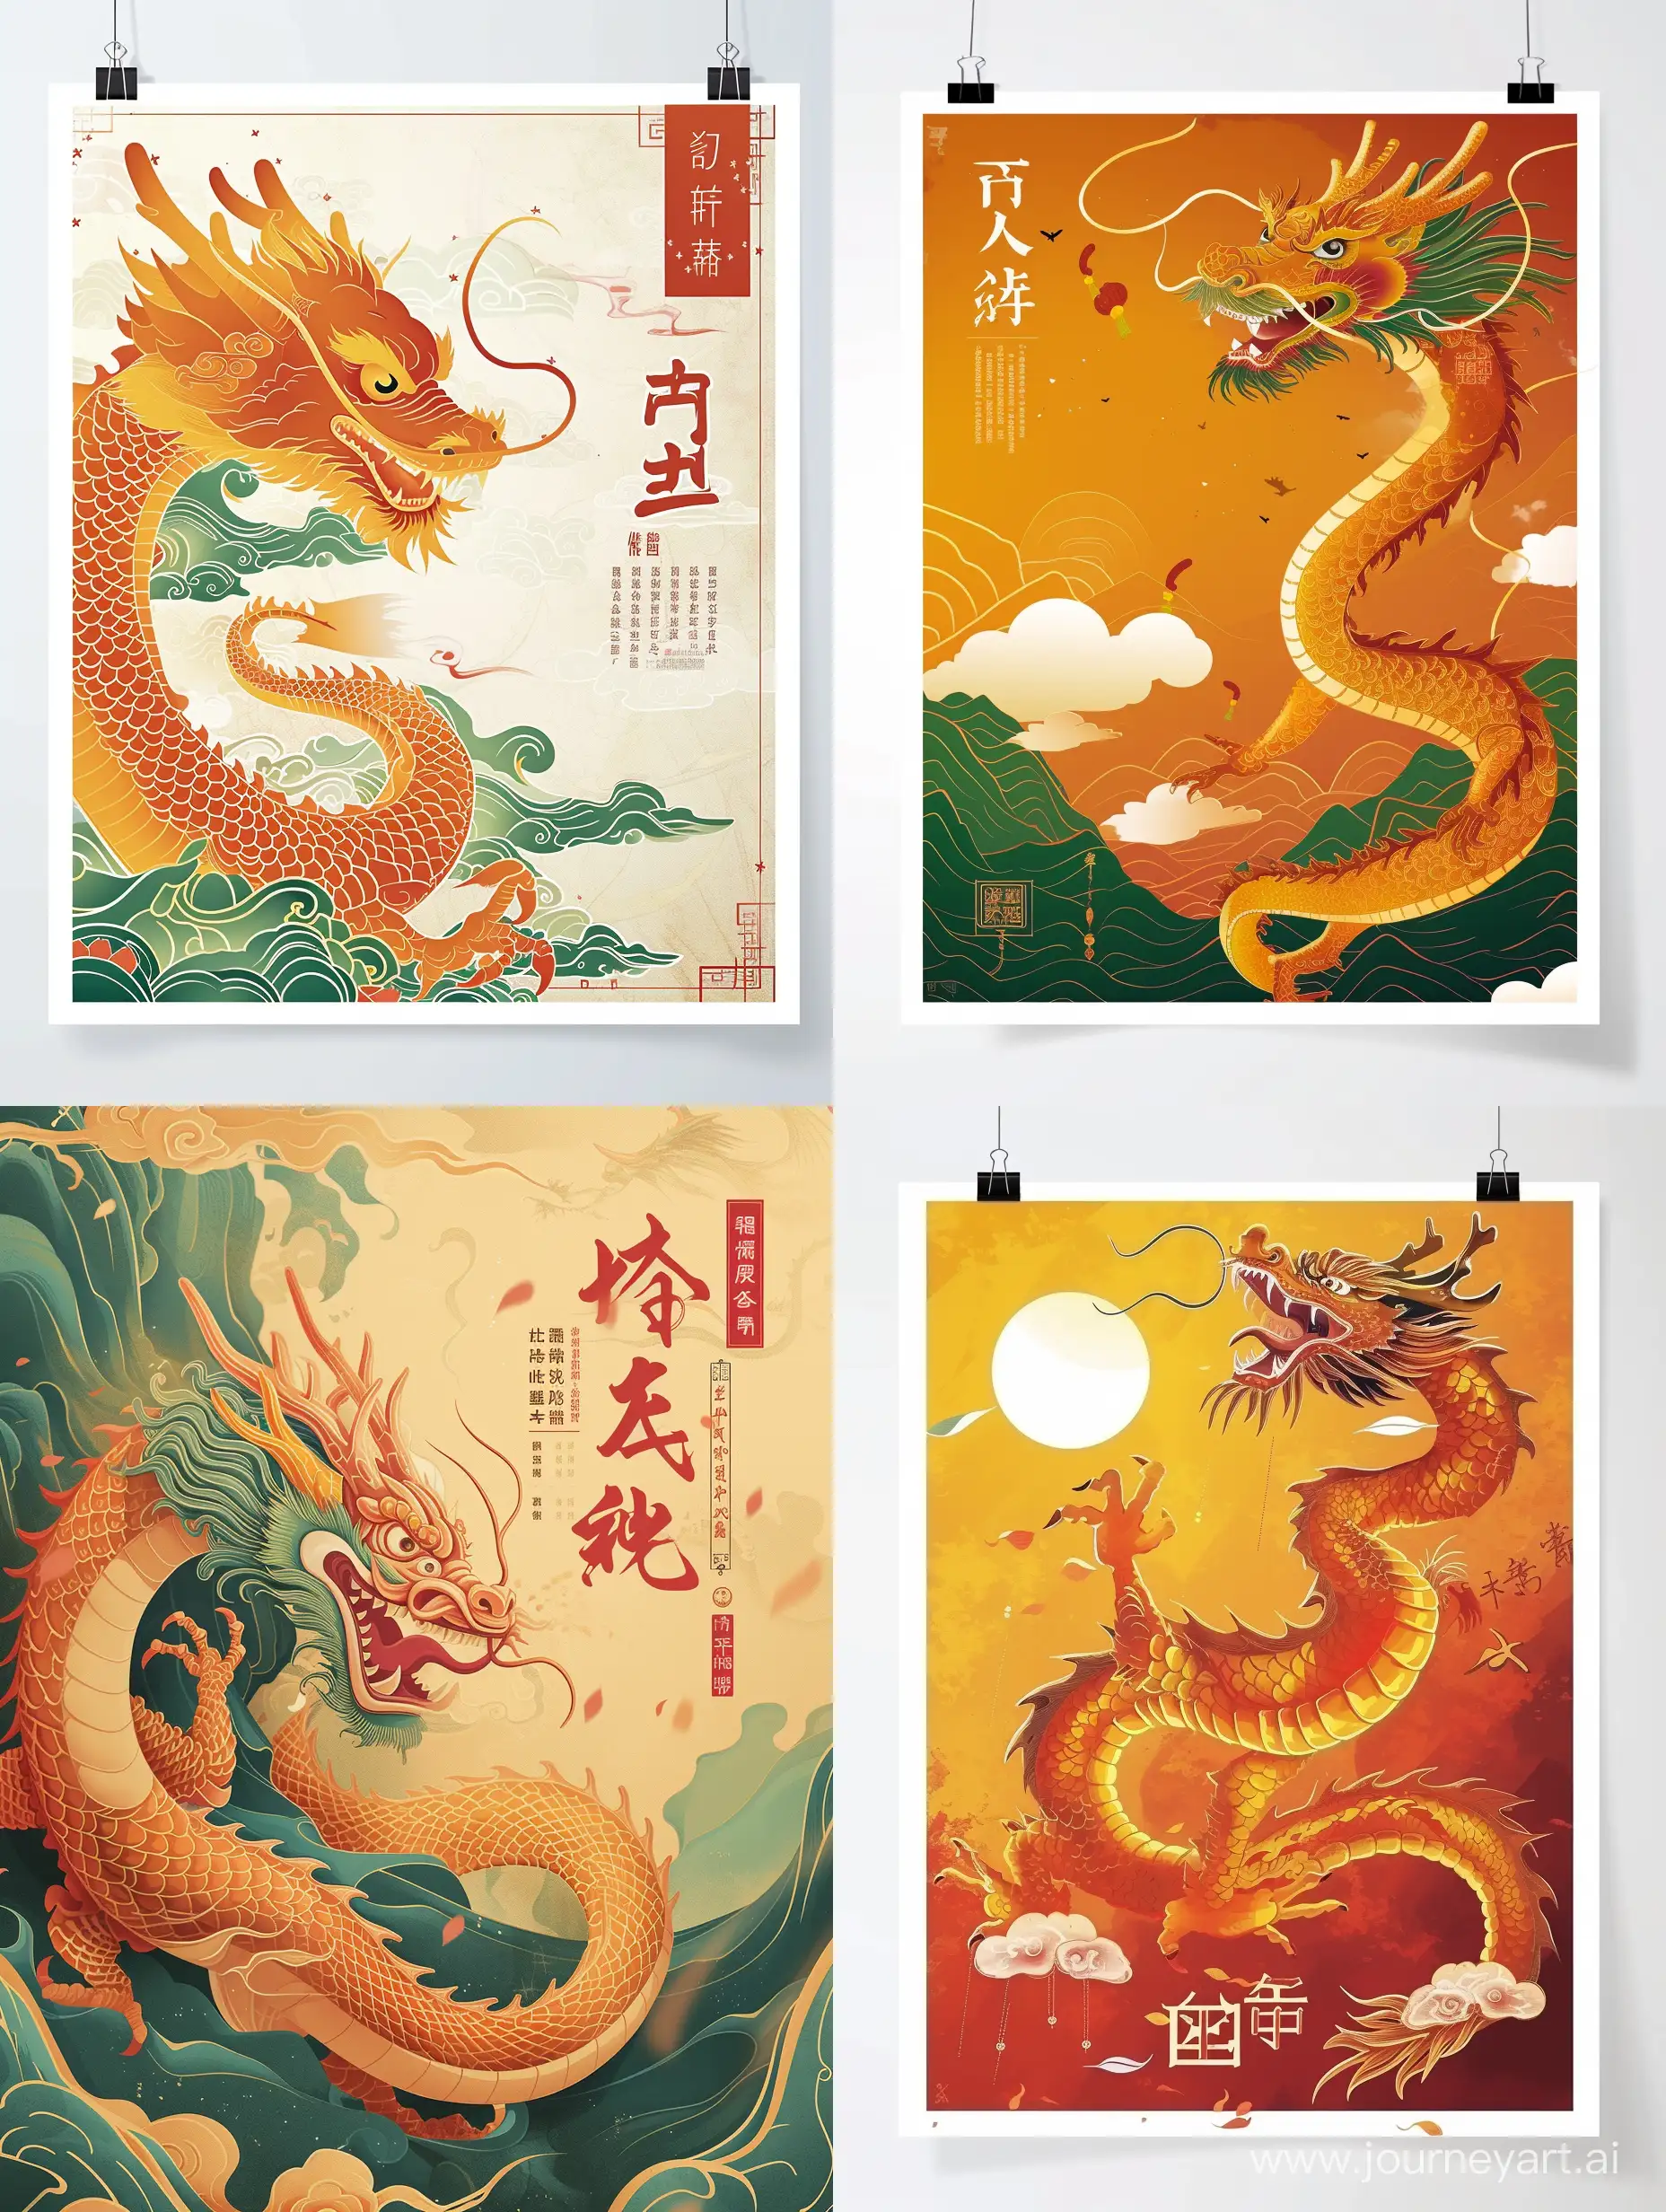 Dragon-Year-Chinese-New-Year-Poster-Celebrating-Festive-Traditions-with-Elegance